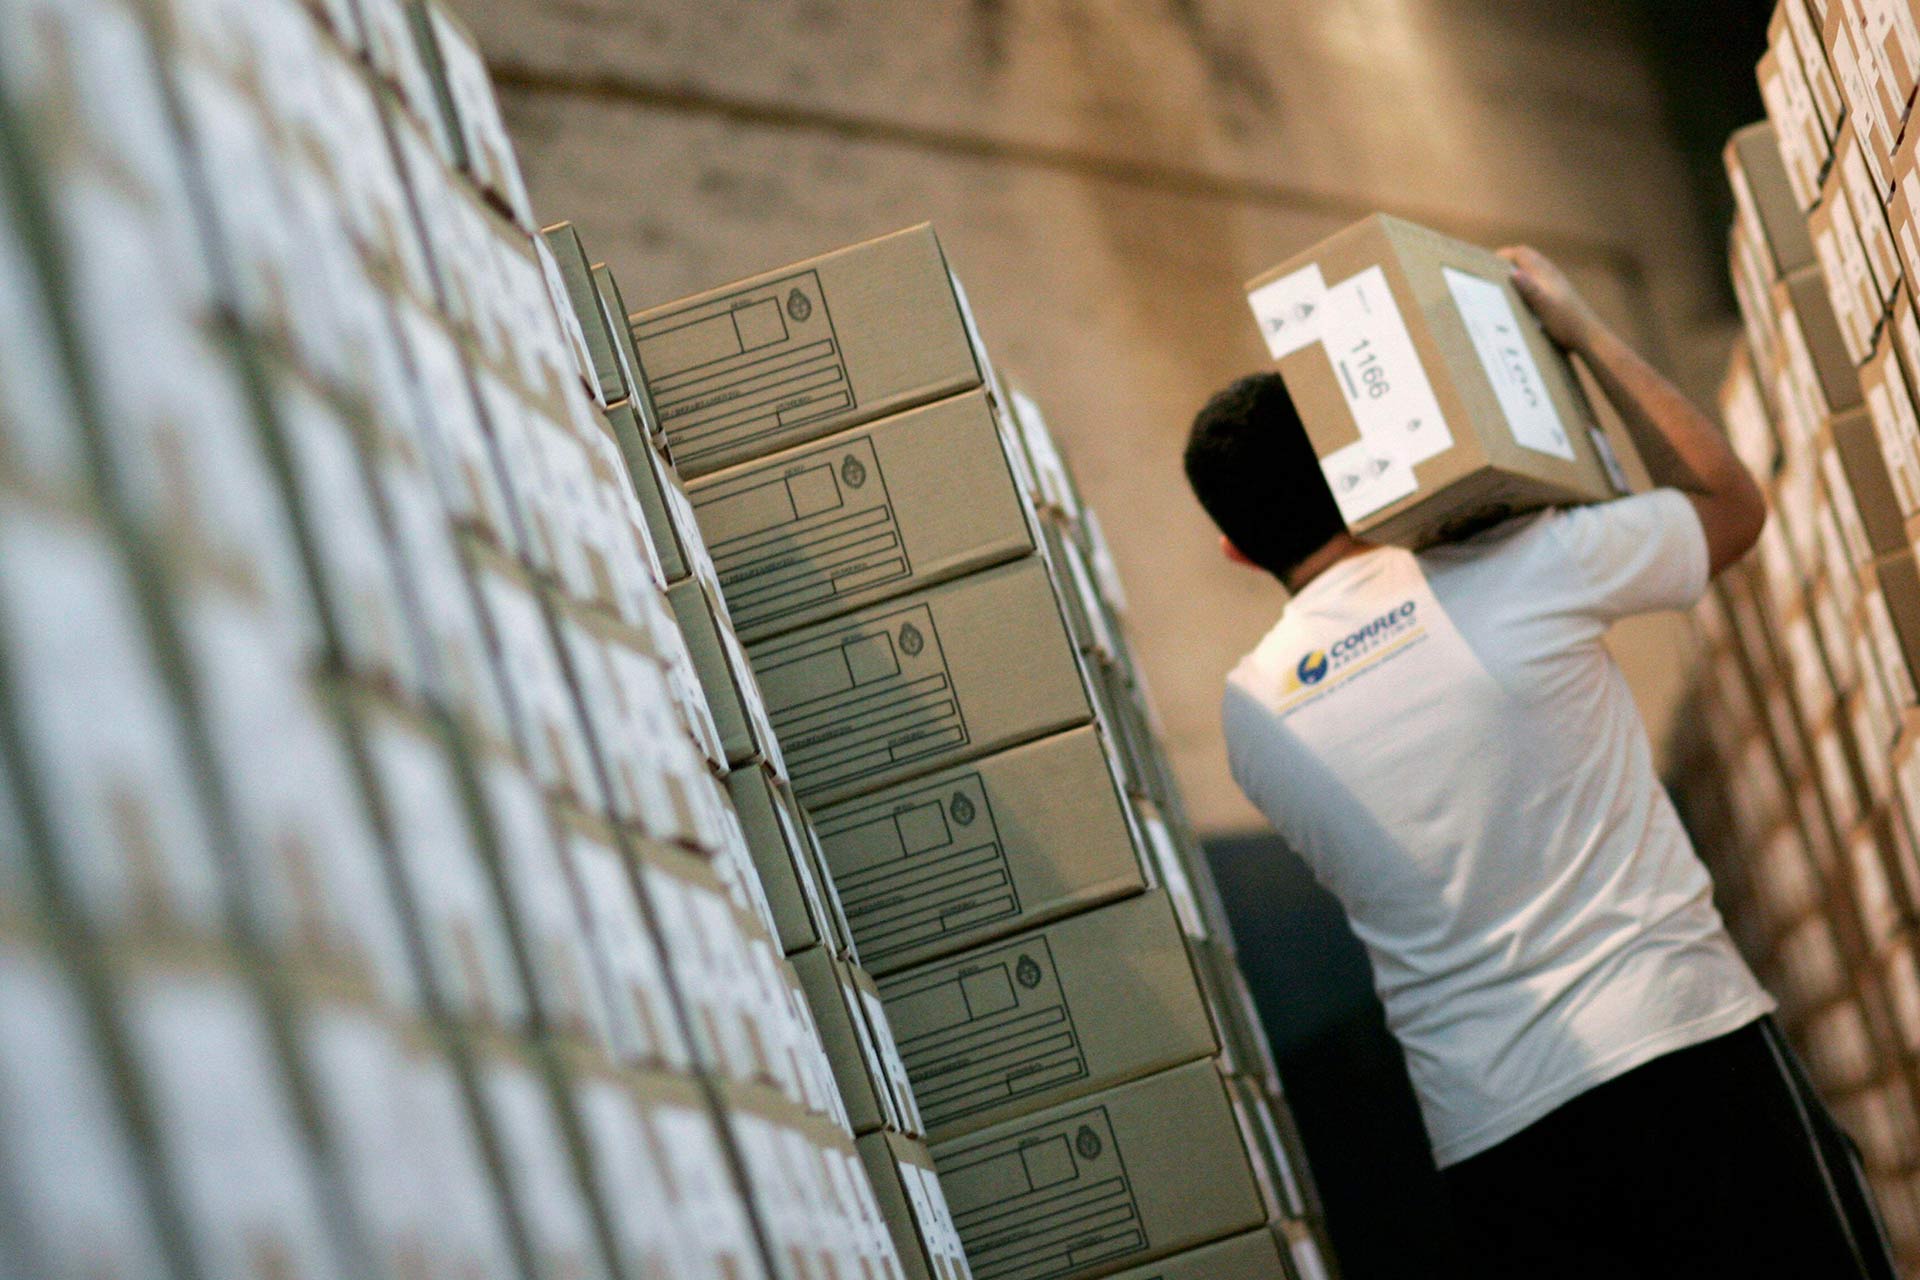 A post office worker carries a ballot box for the presidential election in Buenos Aires on October 21, 2011.